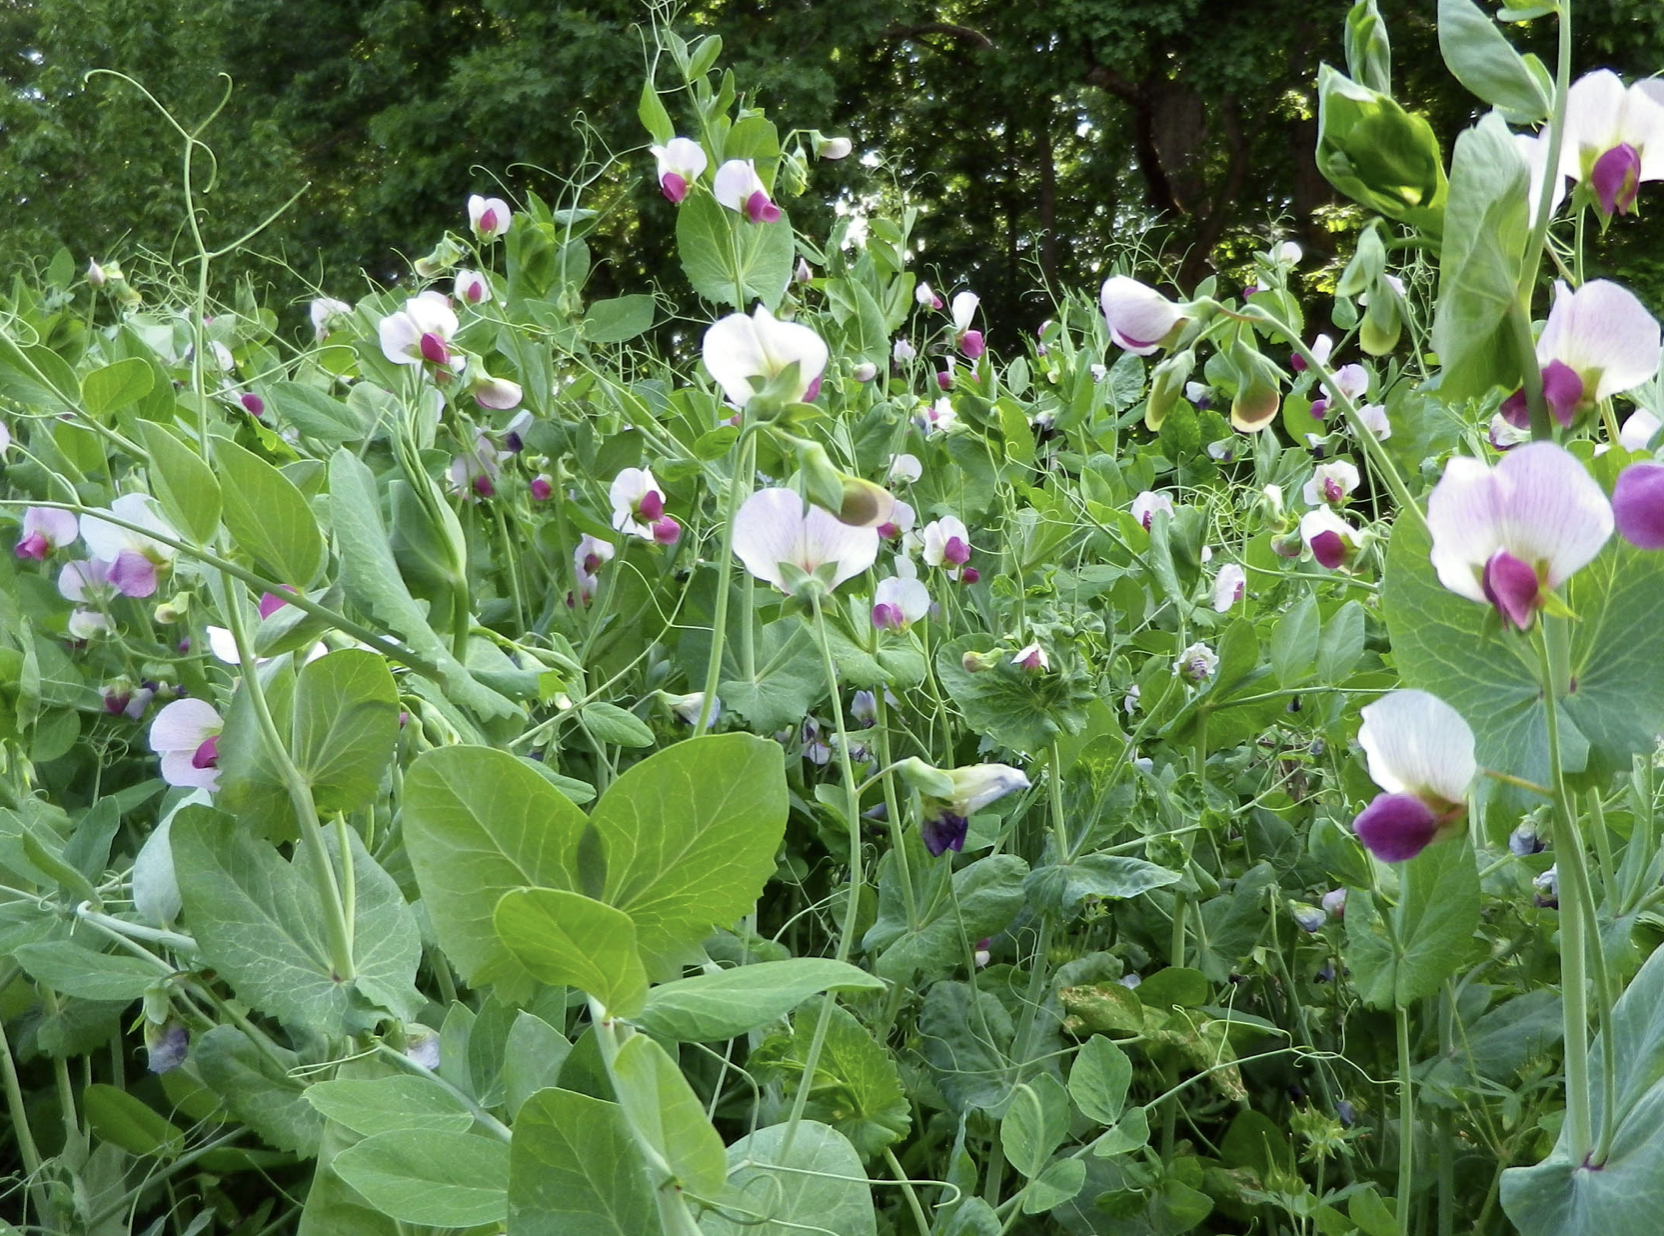 Austrian Winter Peas (cover crop) in flower as part of organic weed management